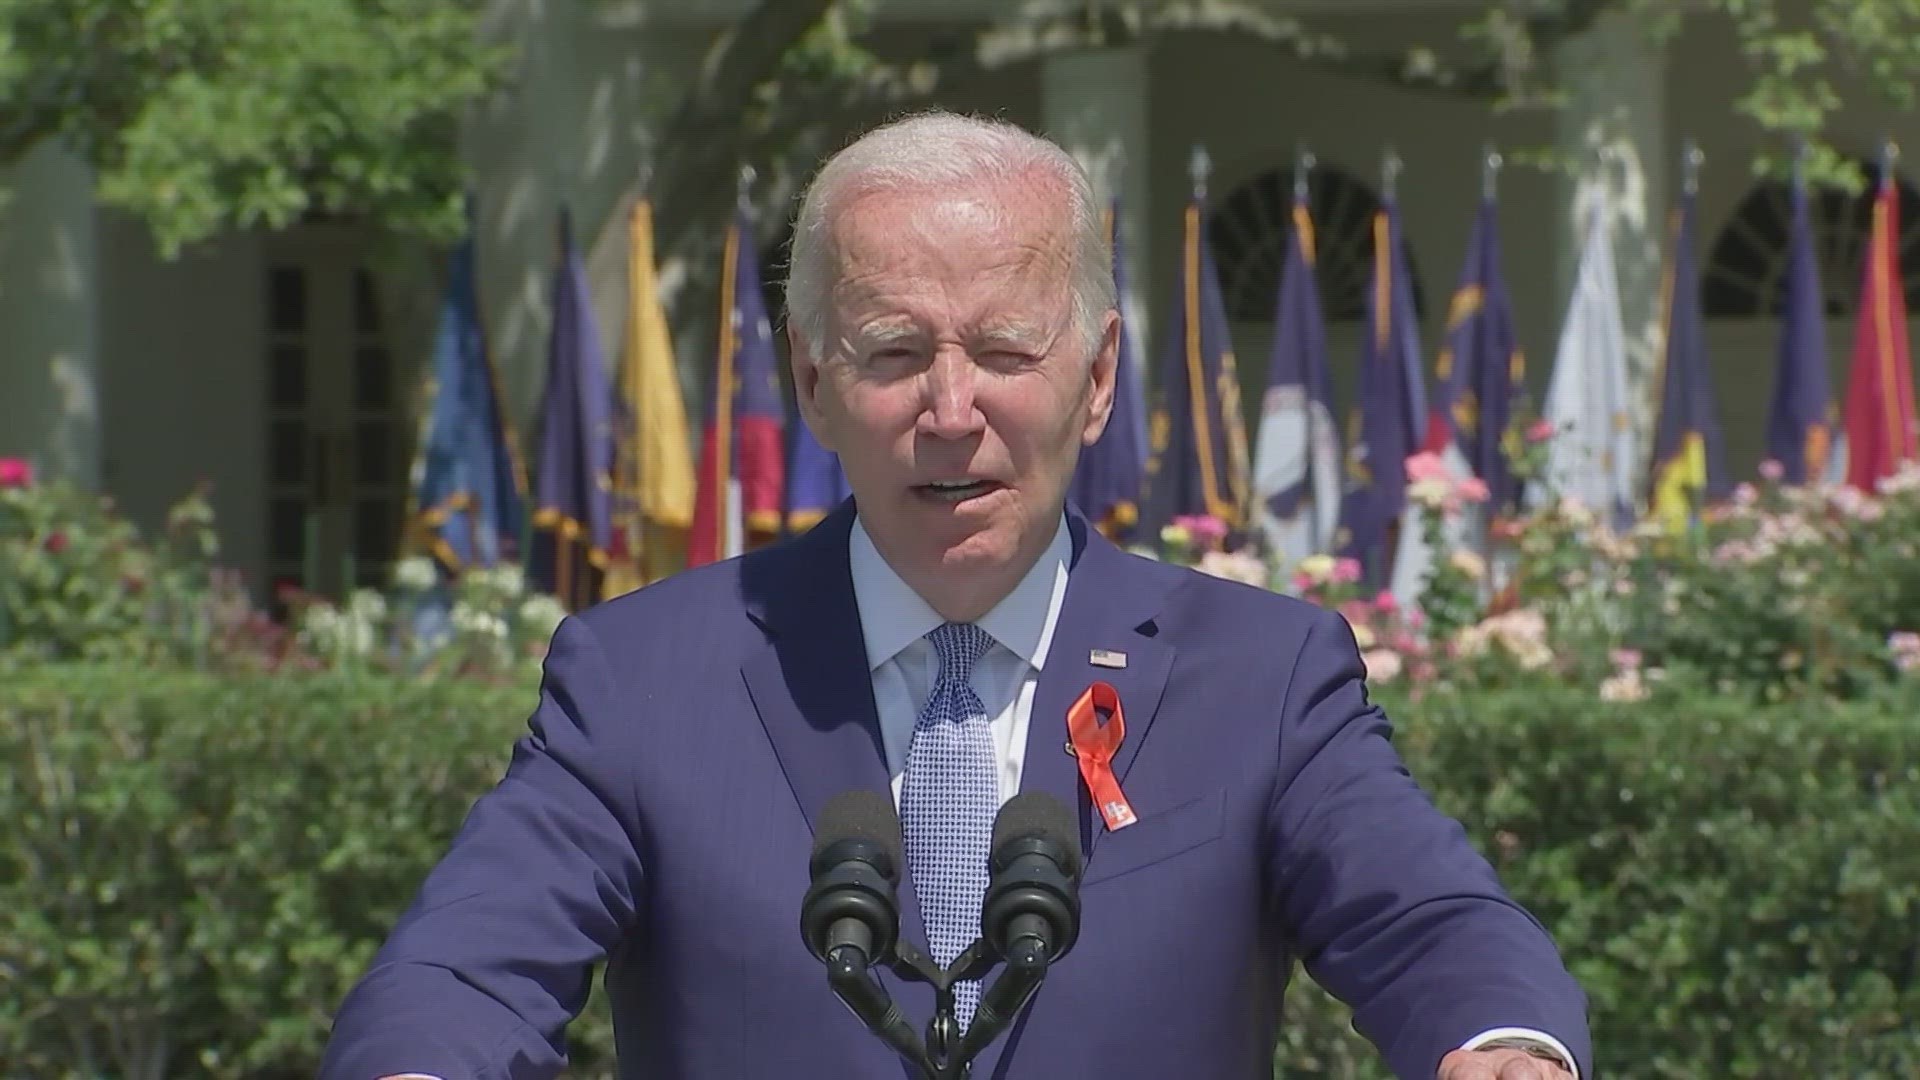 A month after the mass shooting, President Biden pushed legislation called the "Bipartisan Safer Communities Act" through Congress and signed it into law.